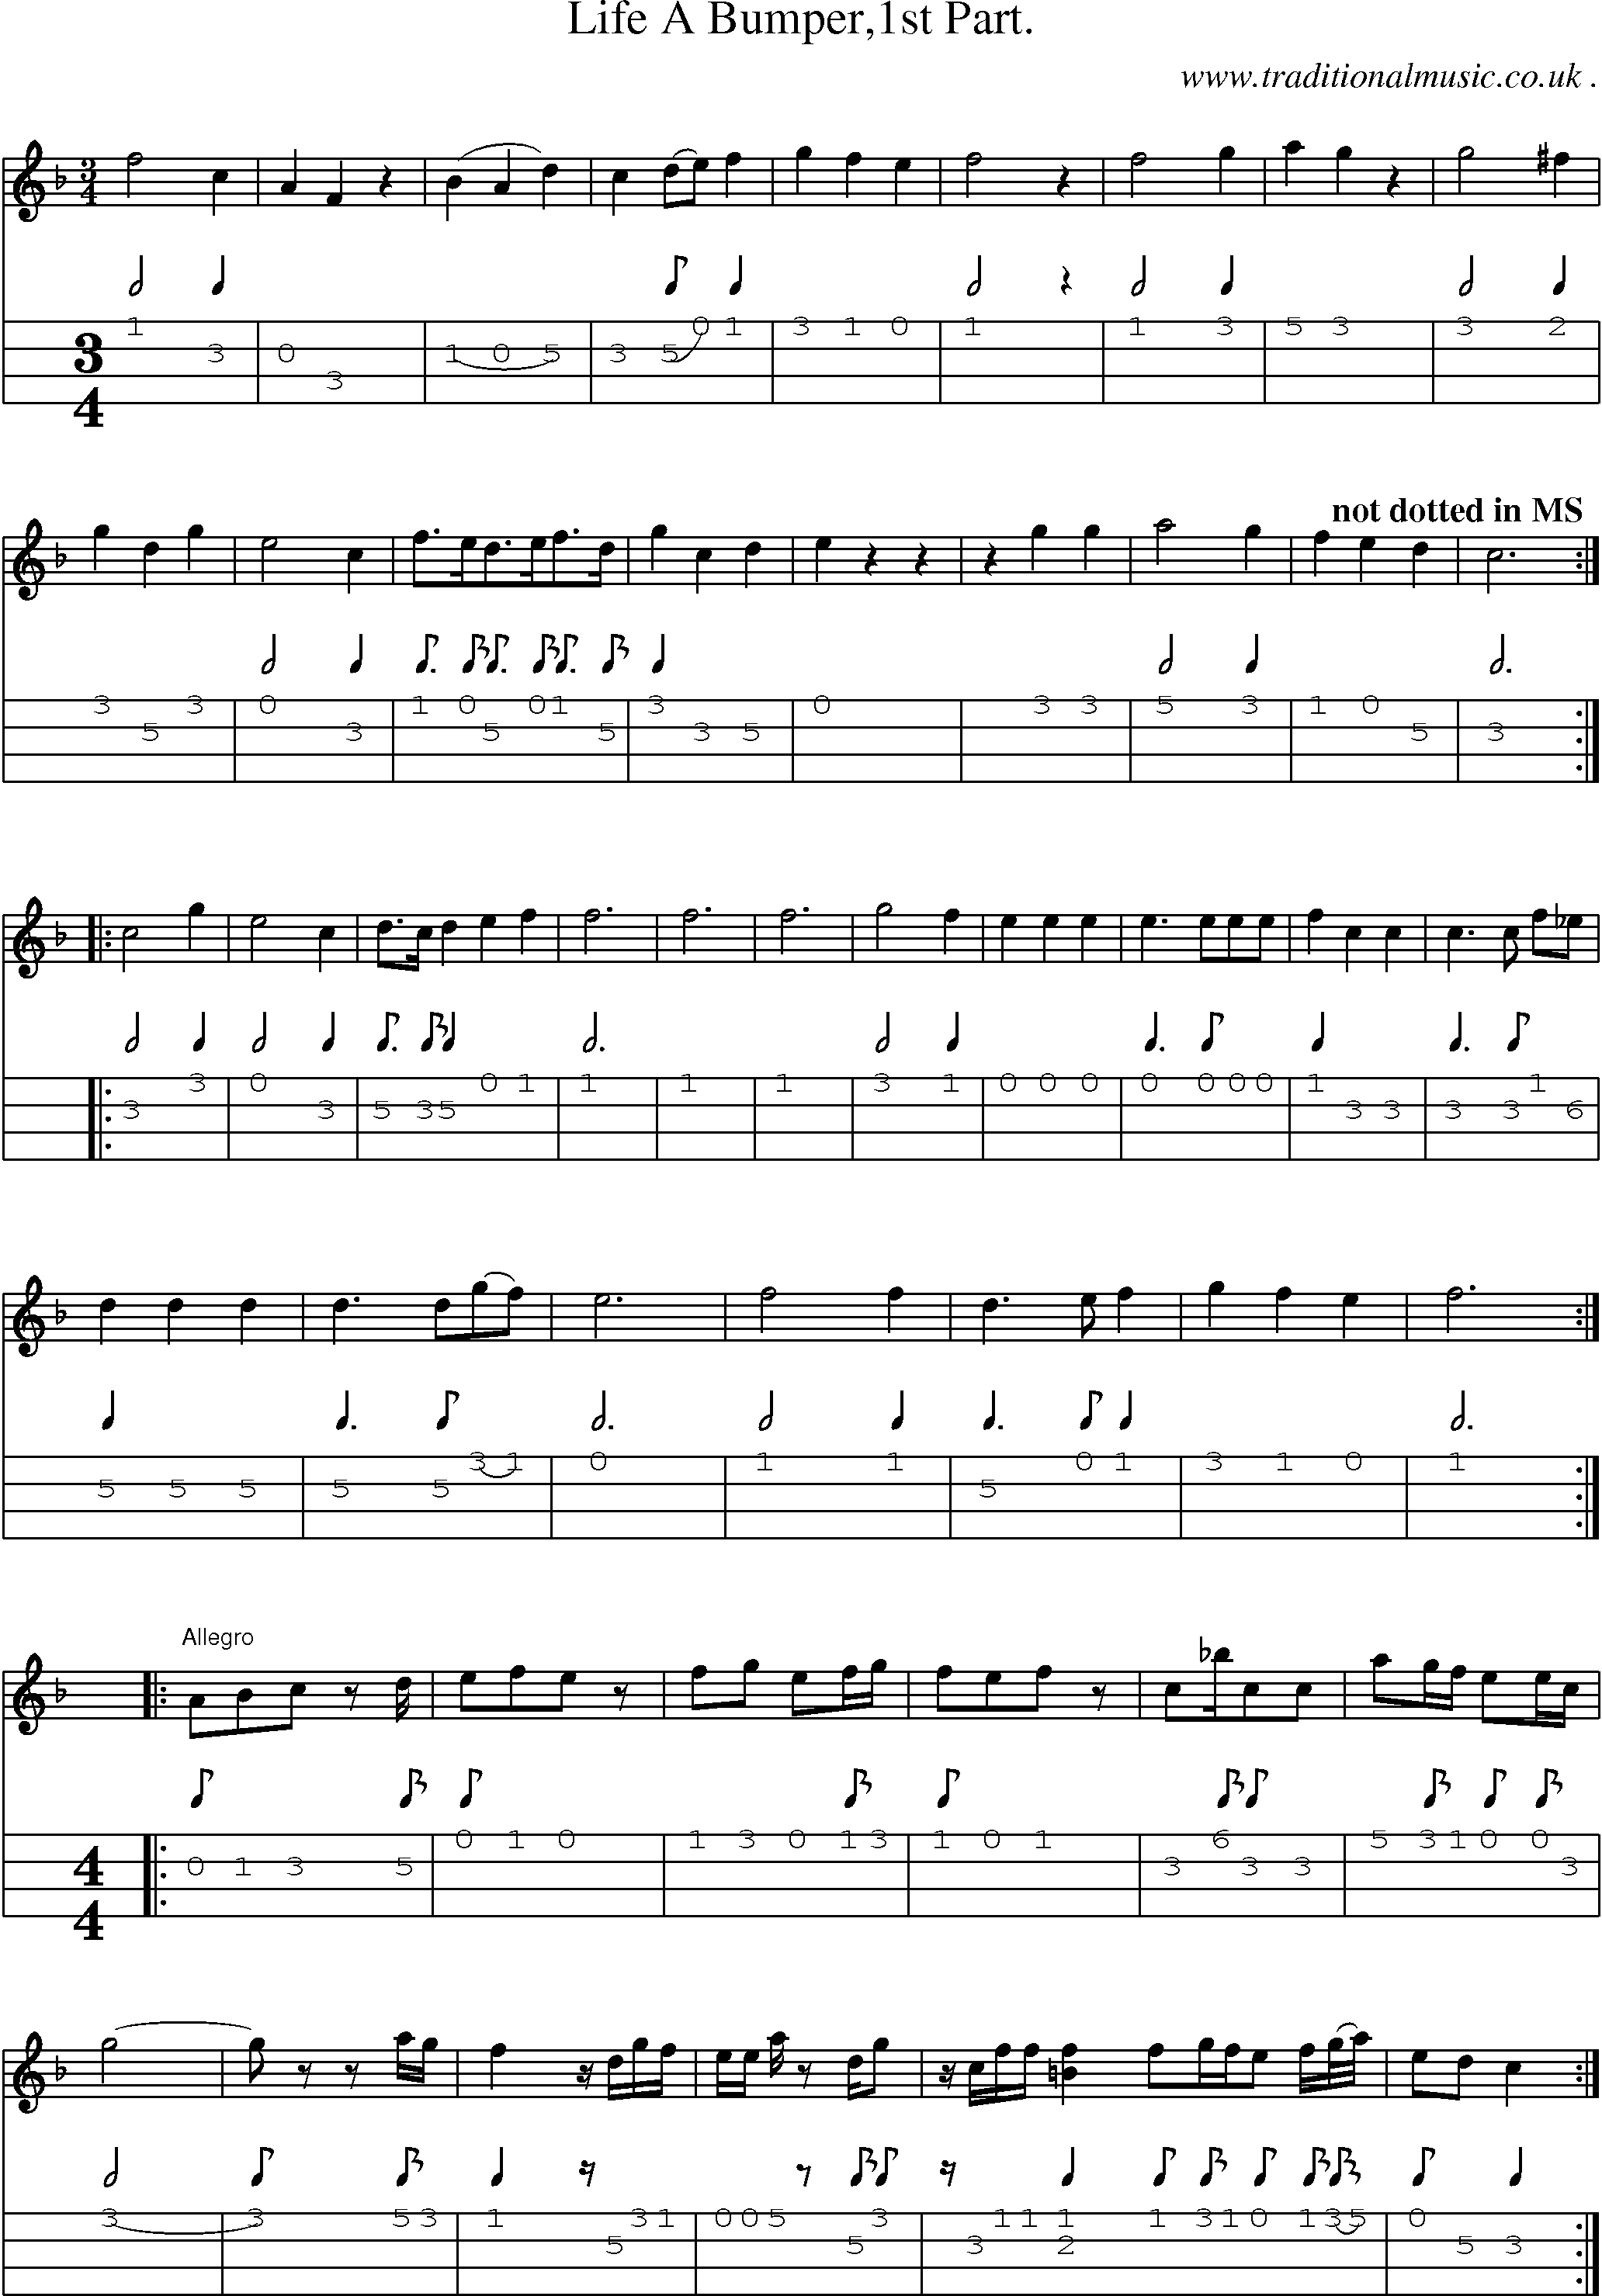 Sheet-Music and Mandolin Tabs for Life A Bumper1st Part